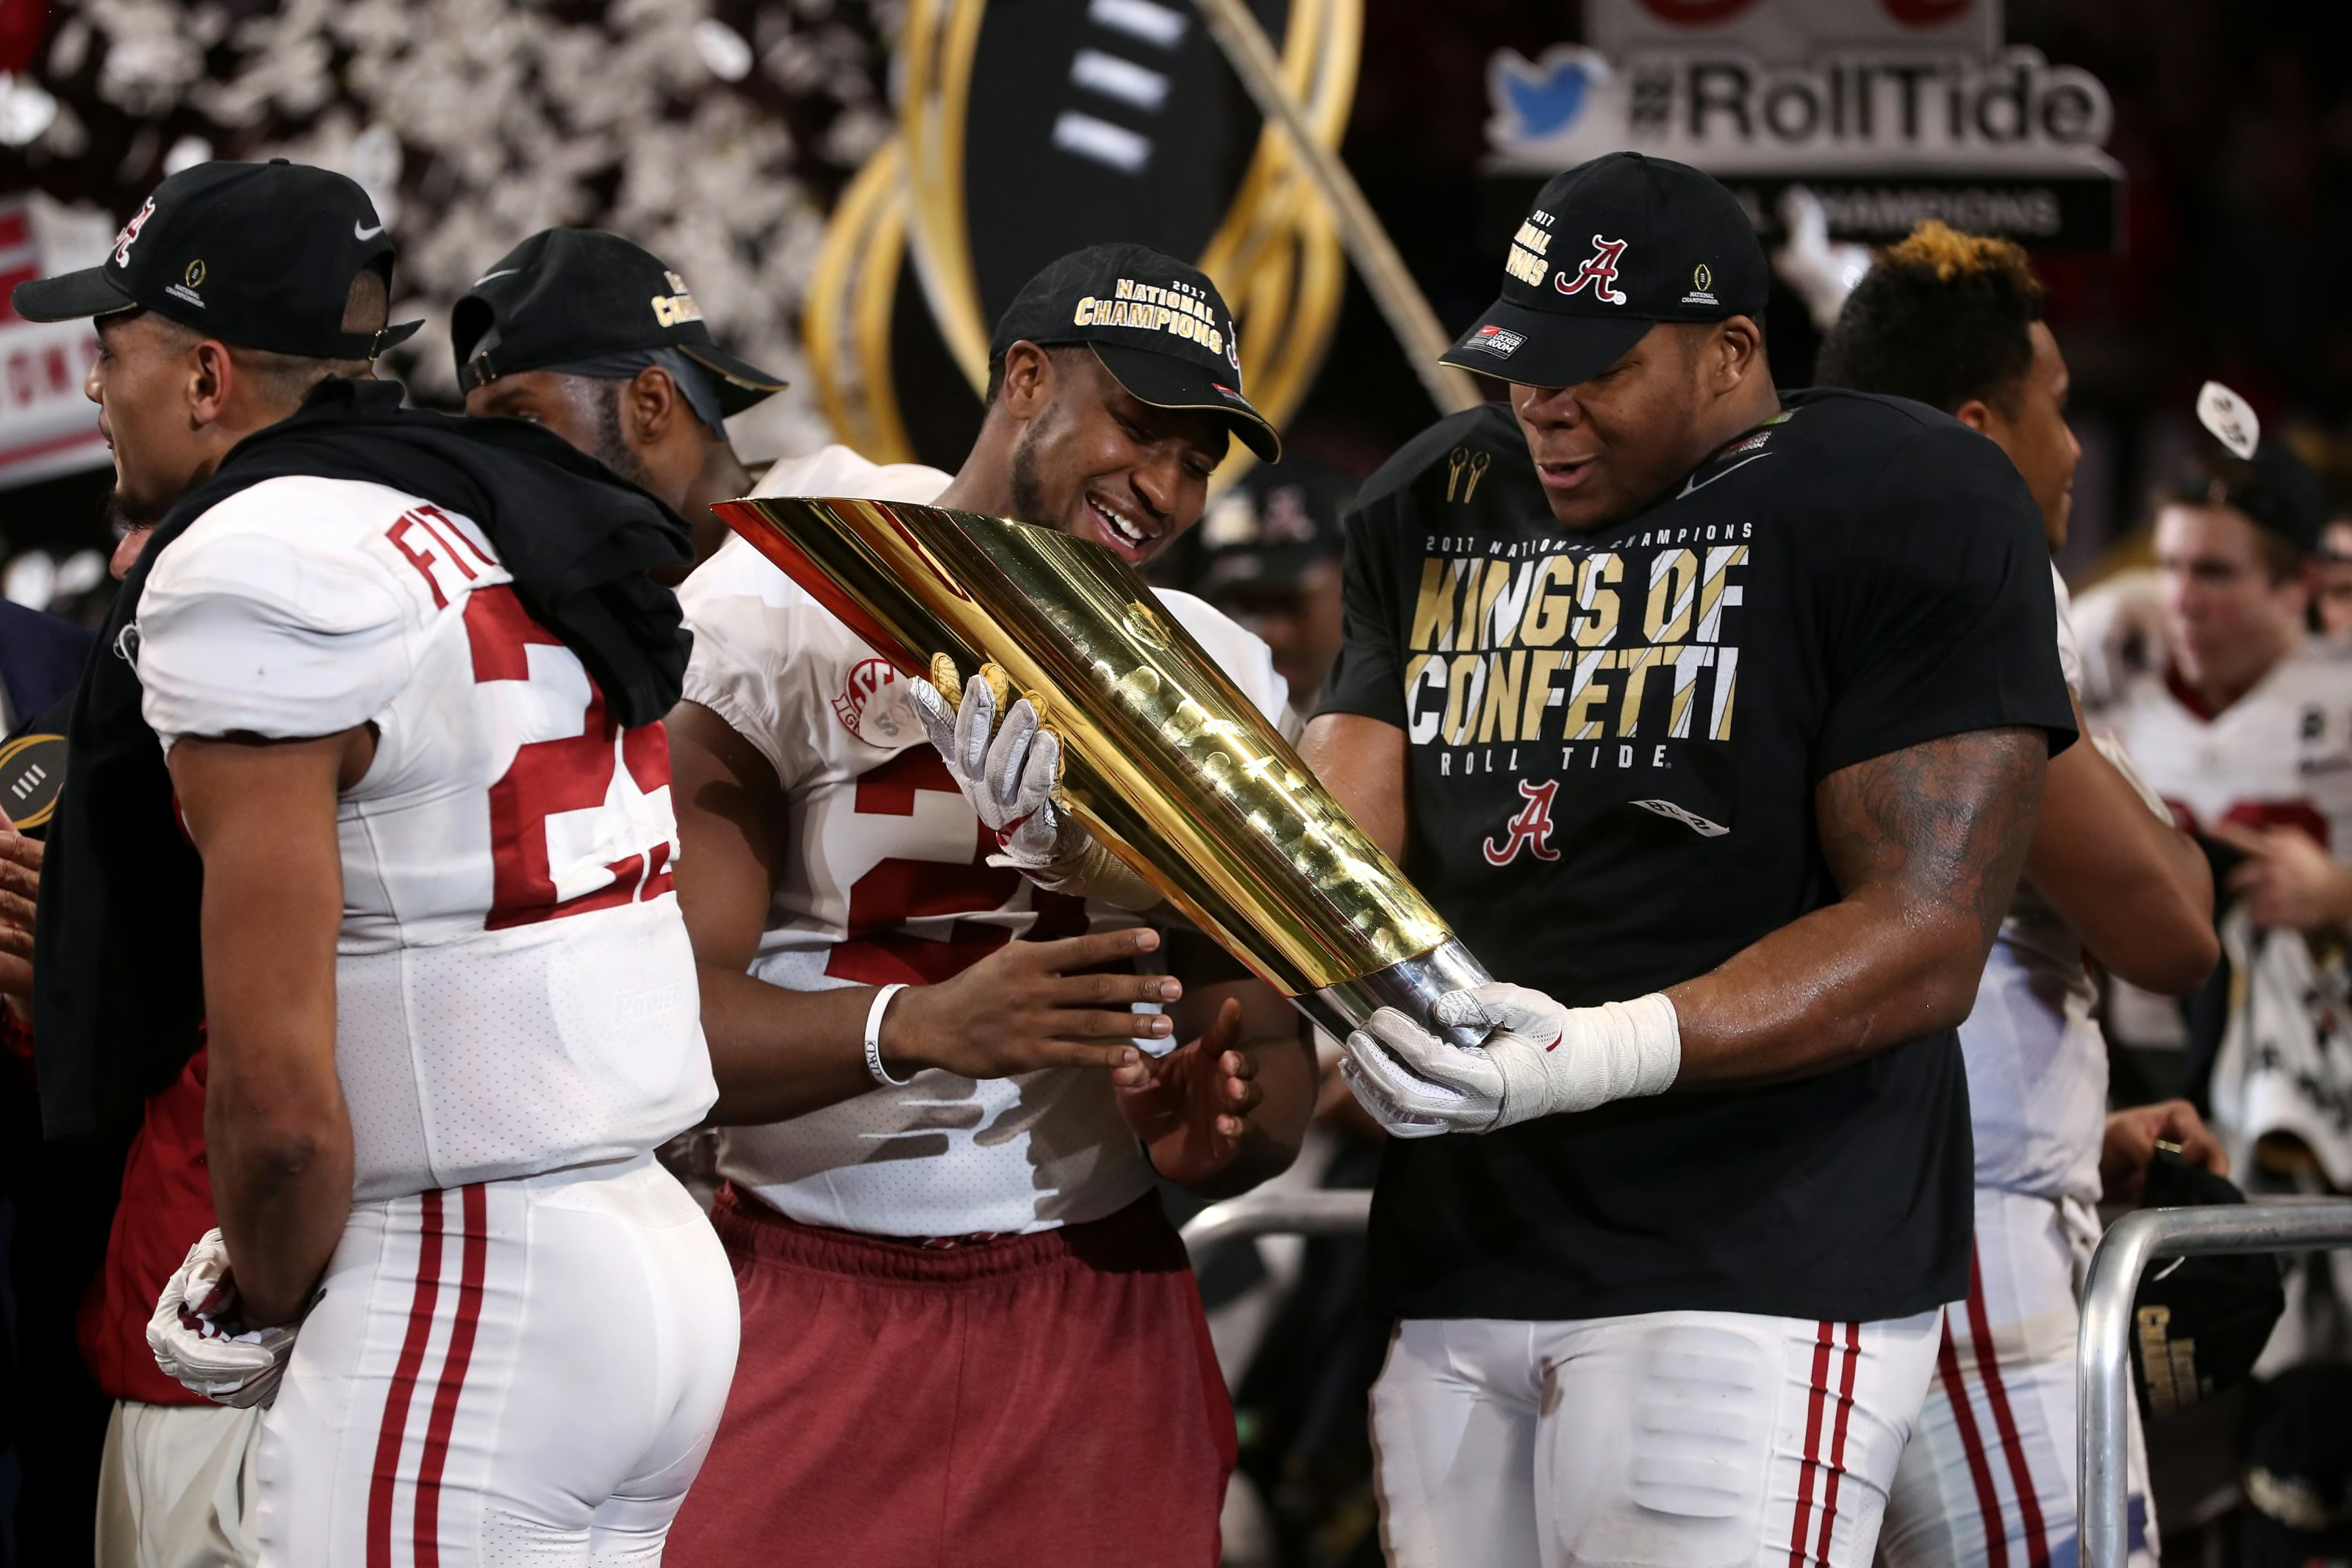 Who Won the 2018 College Football National Championship?